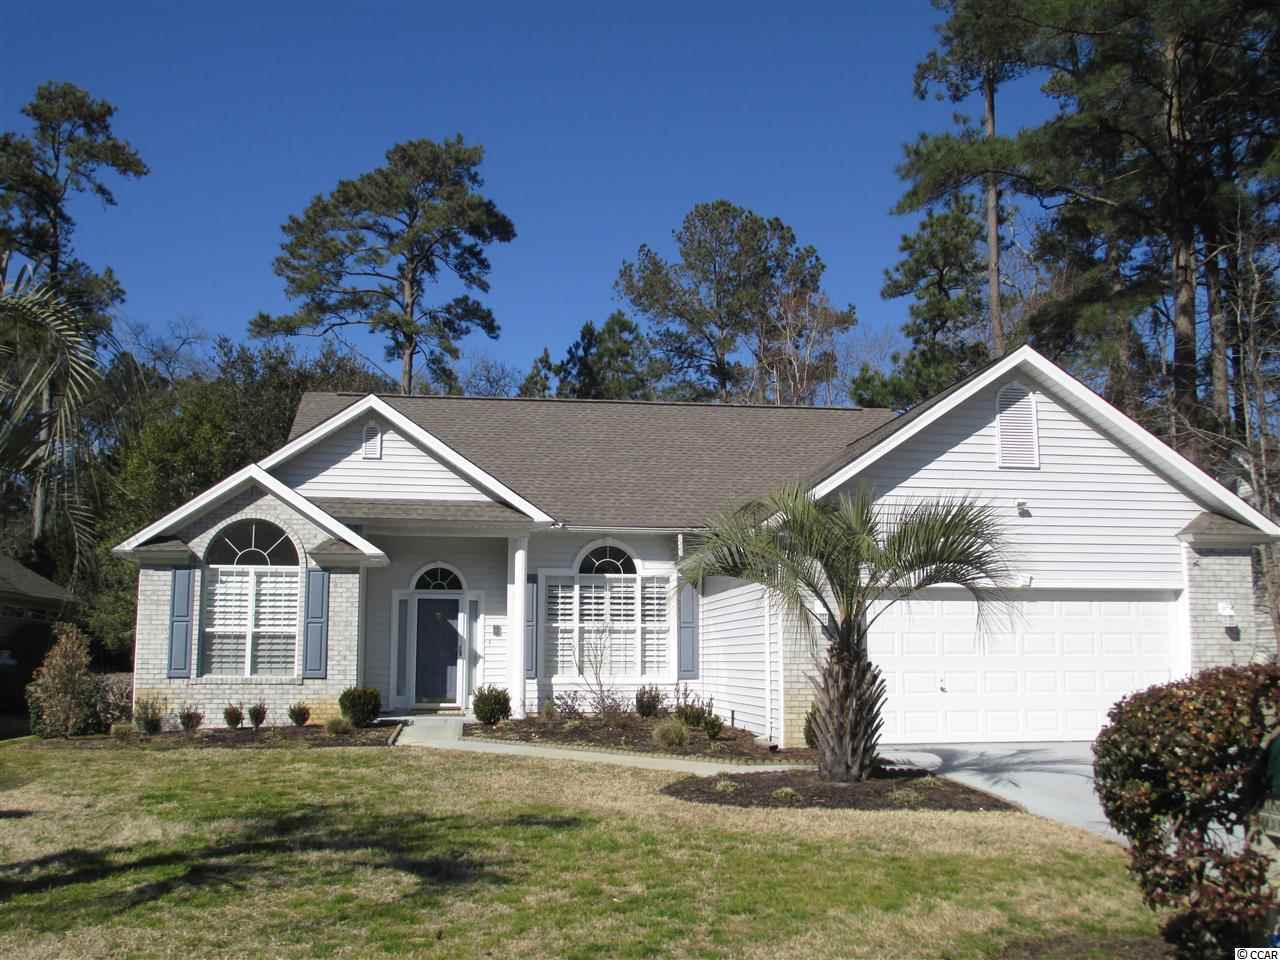 53 Old Barge Rd. Pawleys Island, SC 29585